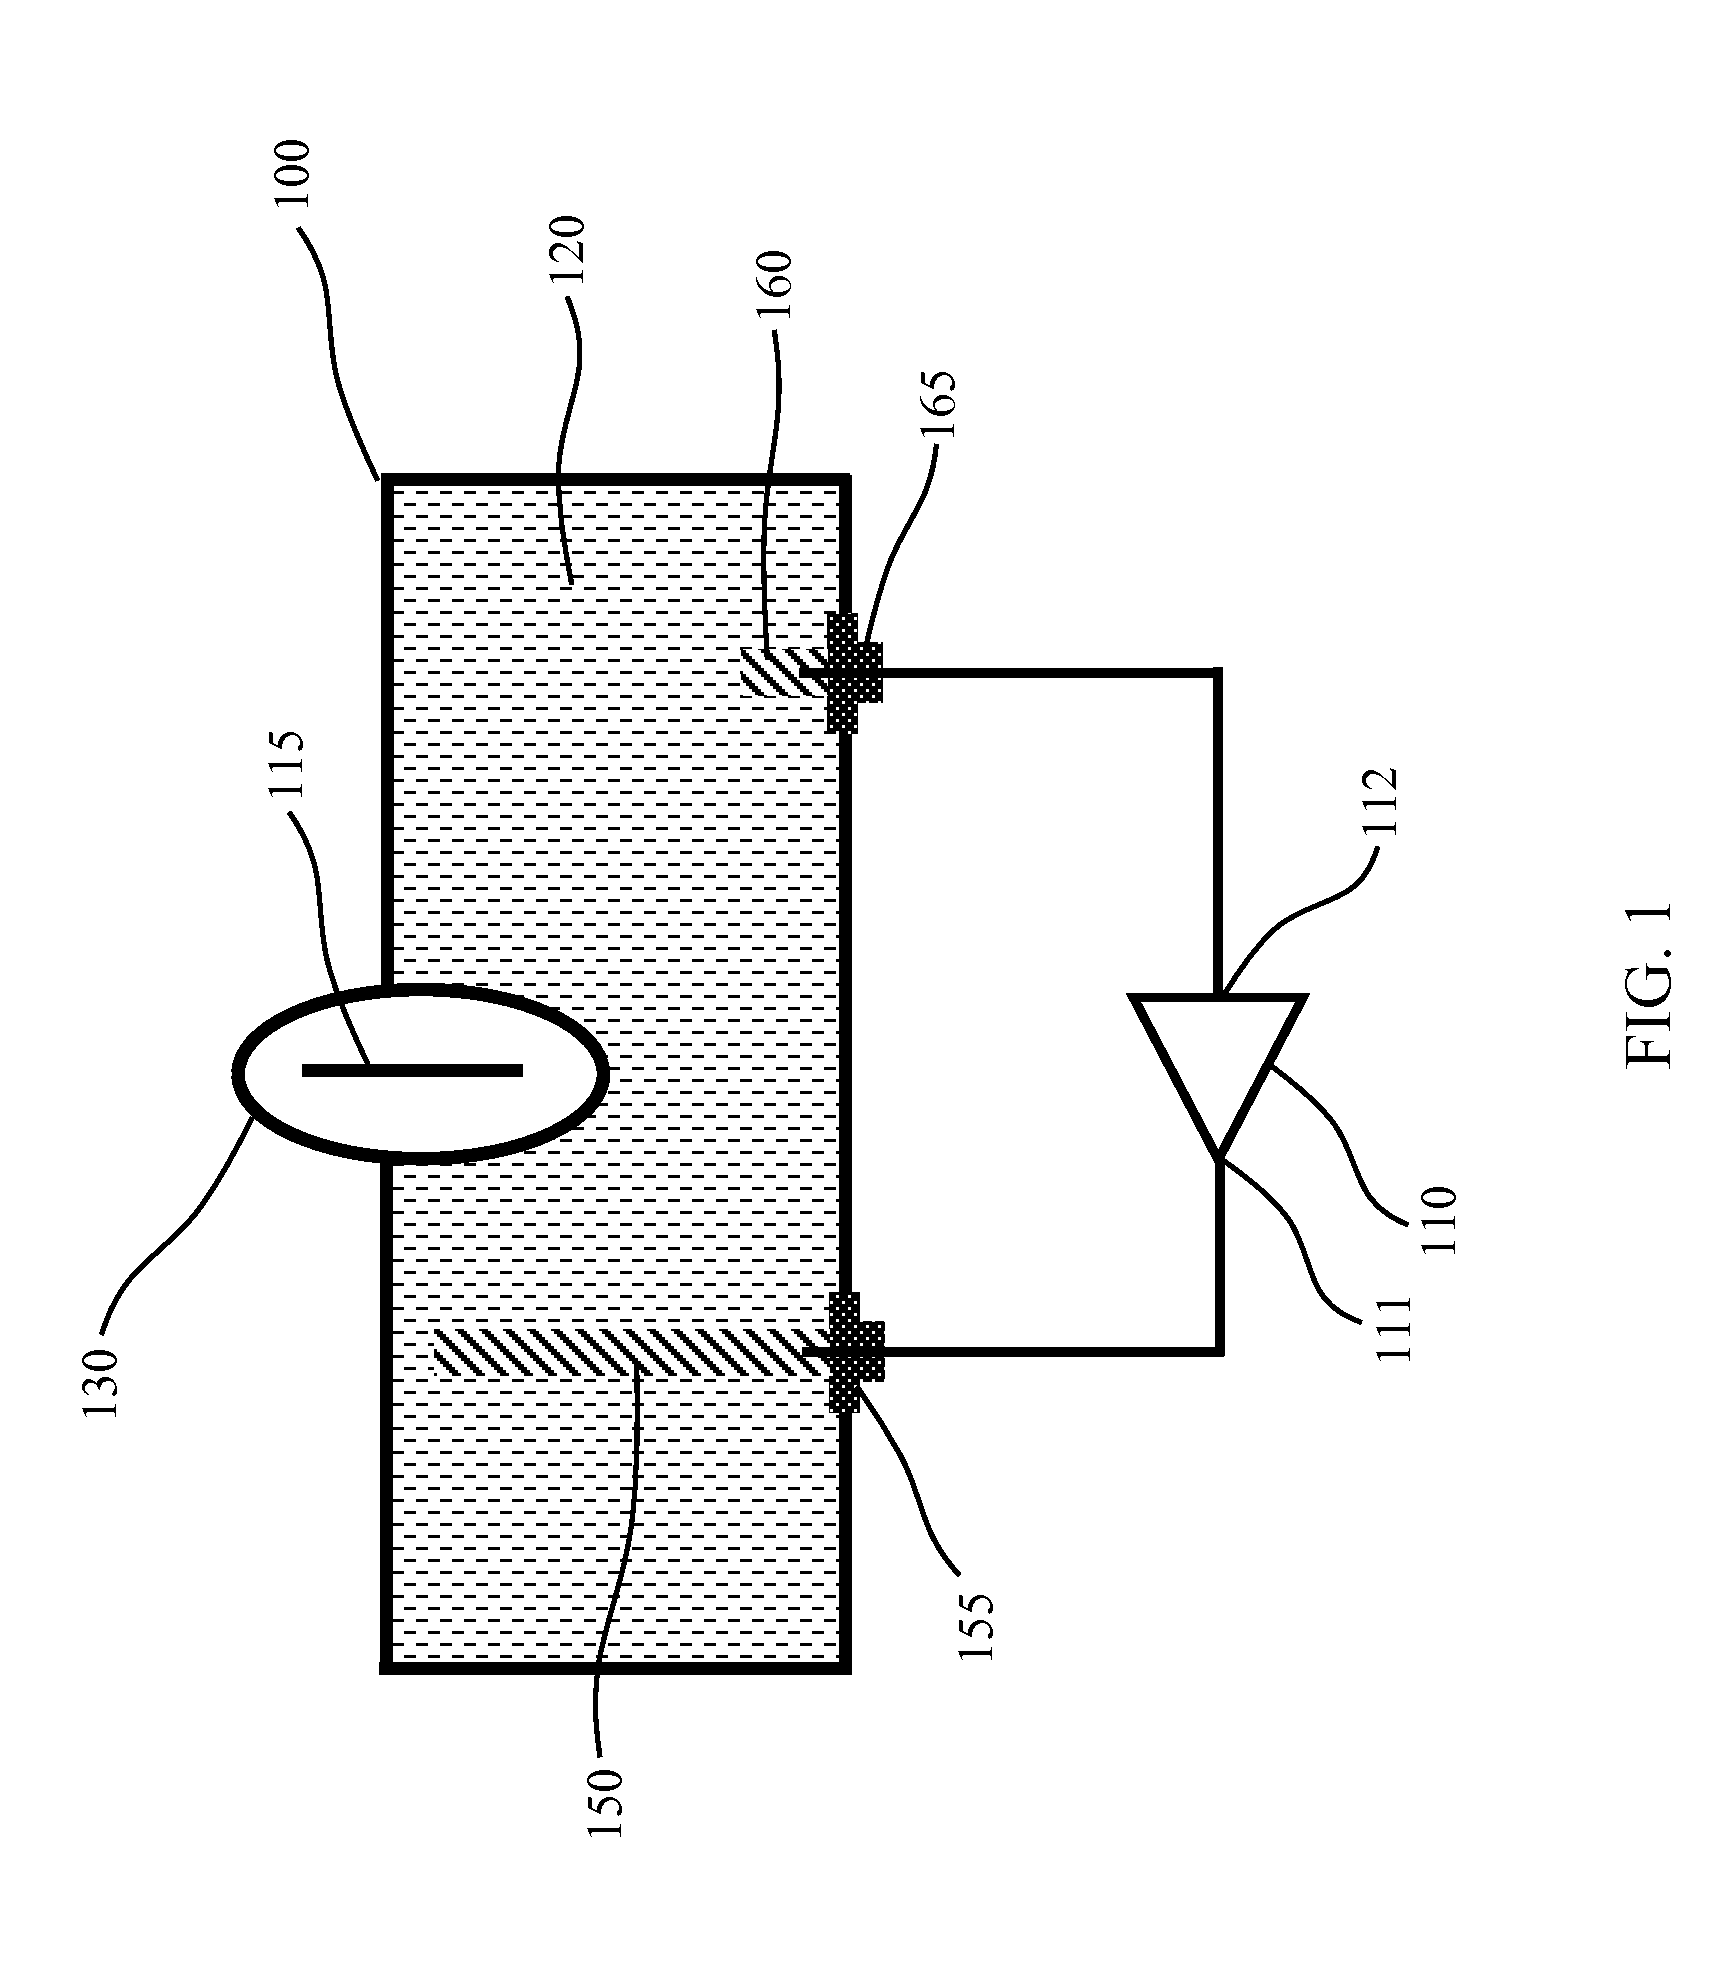 Plasma Lamp with Dielectric Waveguide Body Having a Width Greater Than a Length